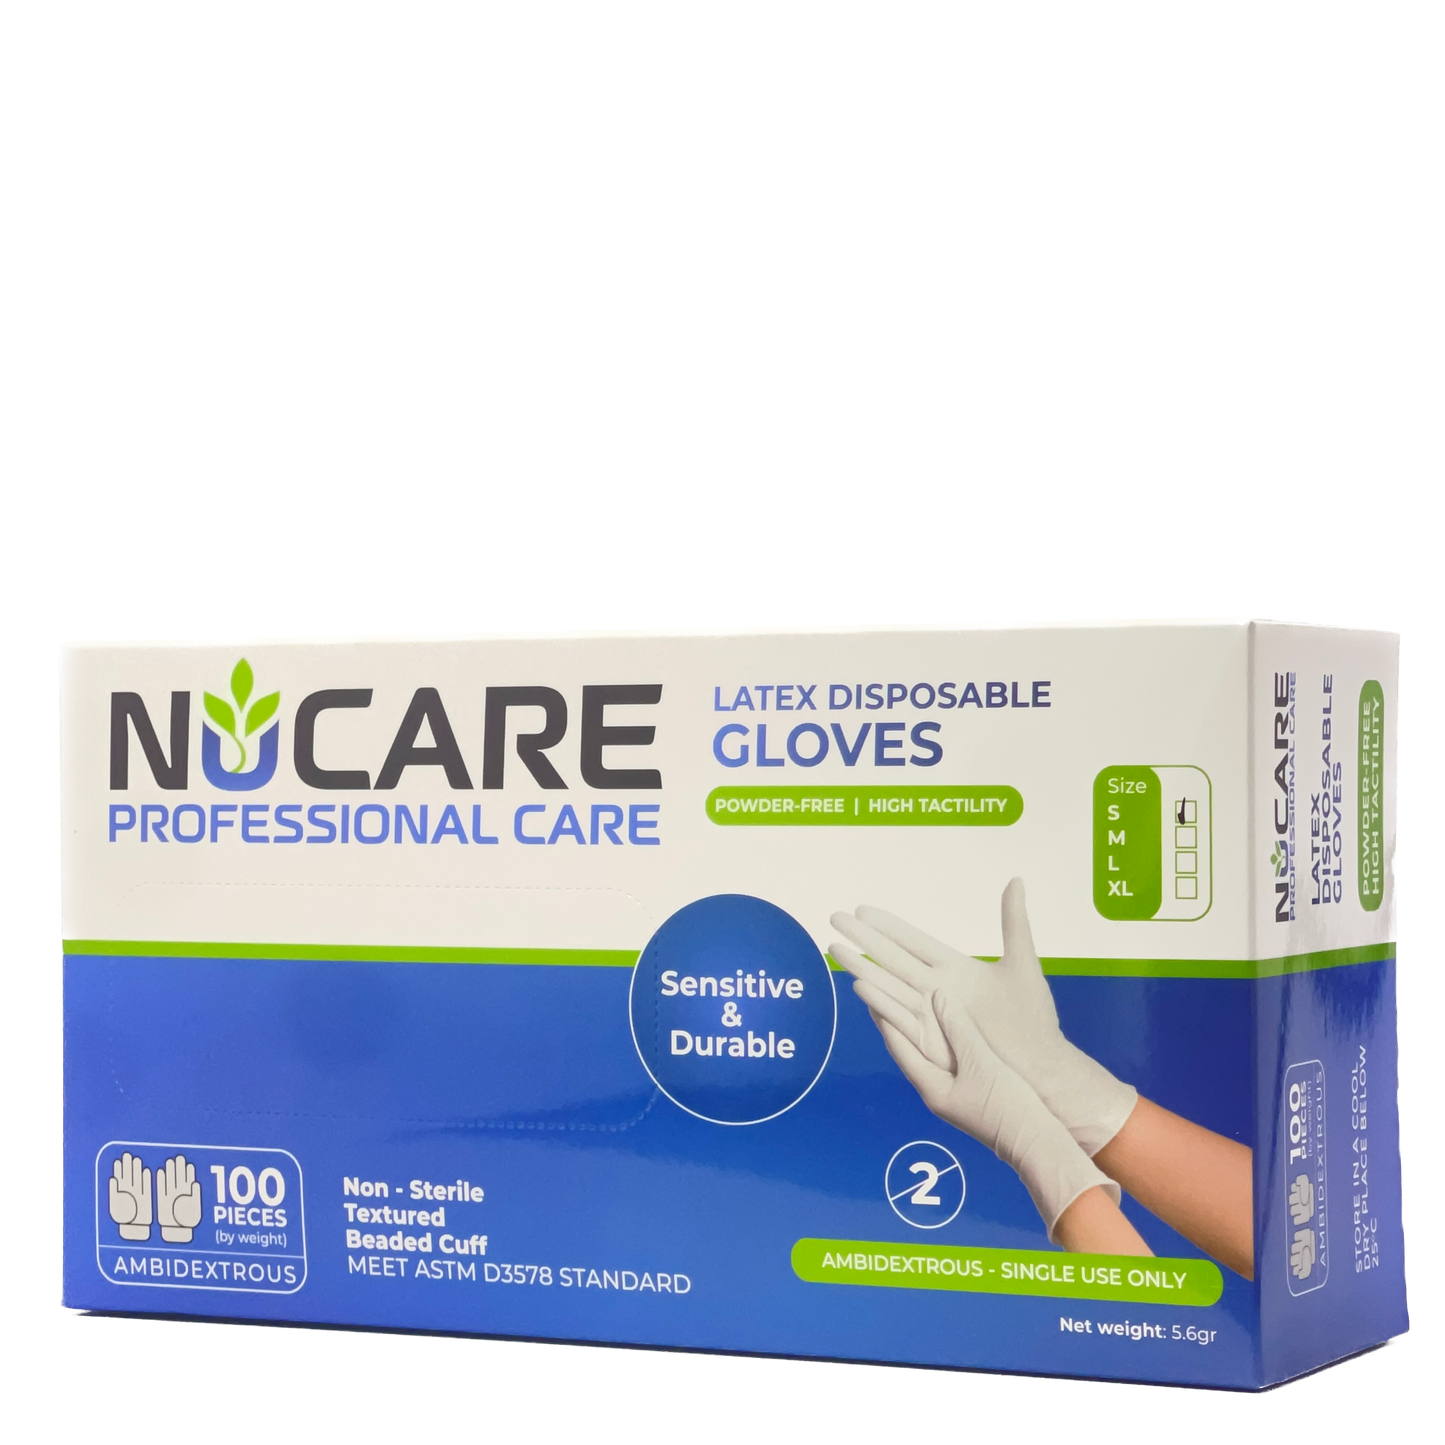 NuCare Professional Care Latex Disposable Gloves (10 boxes x 100 pieces)